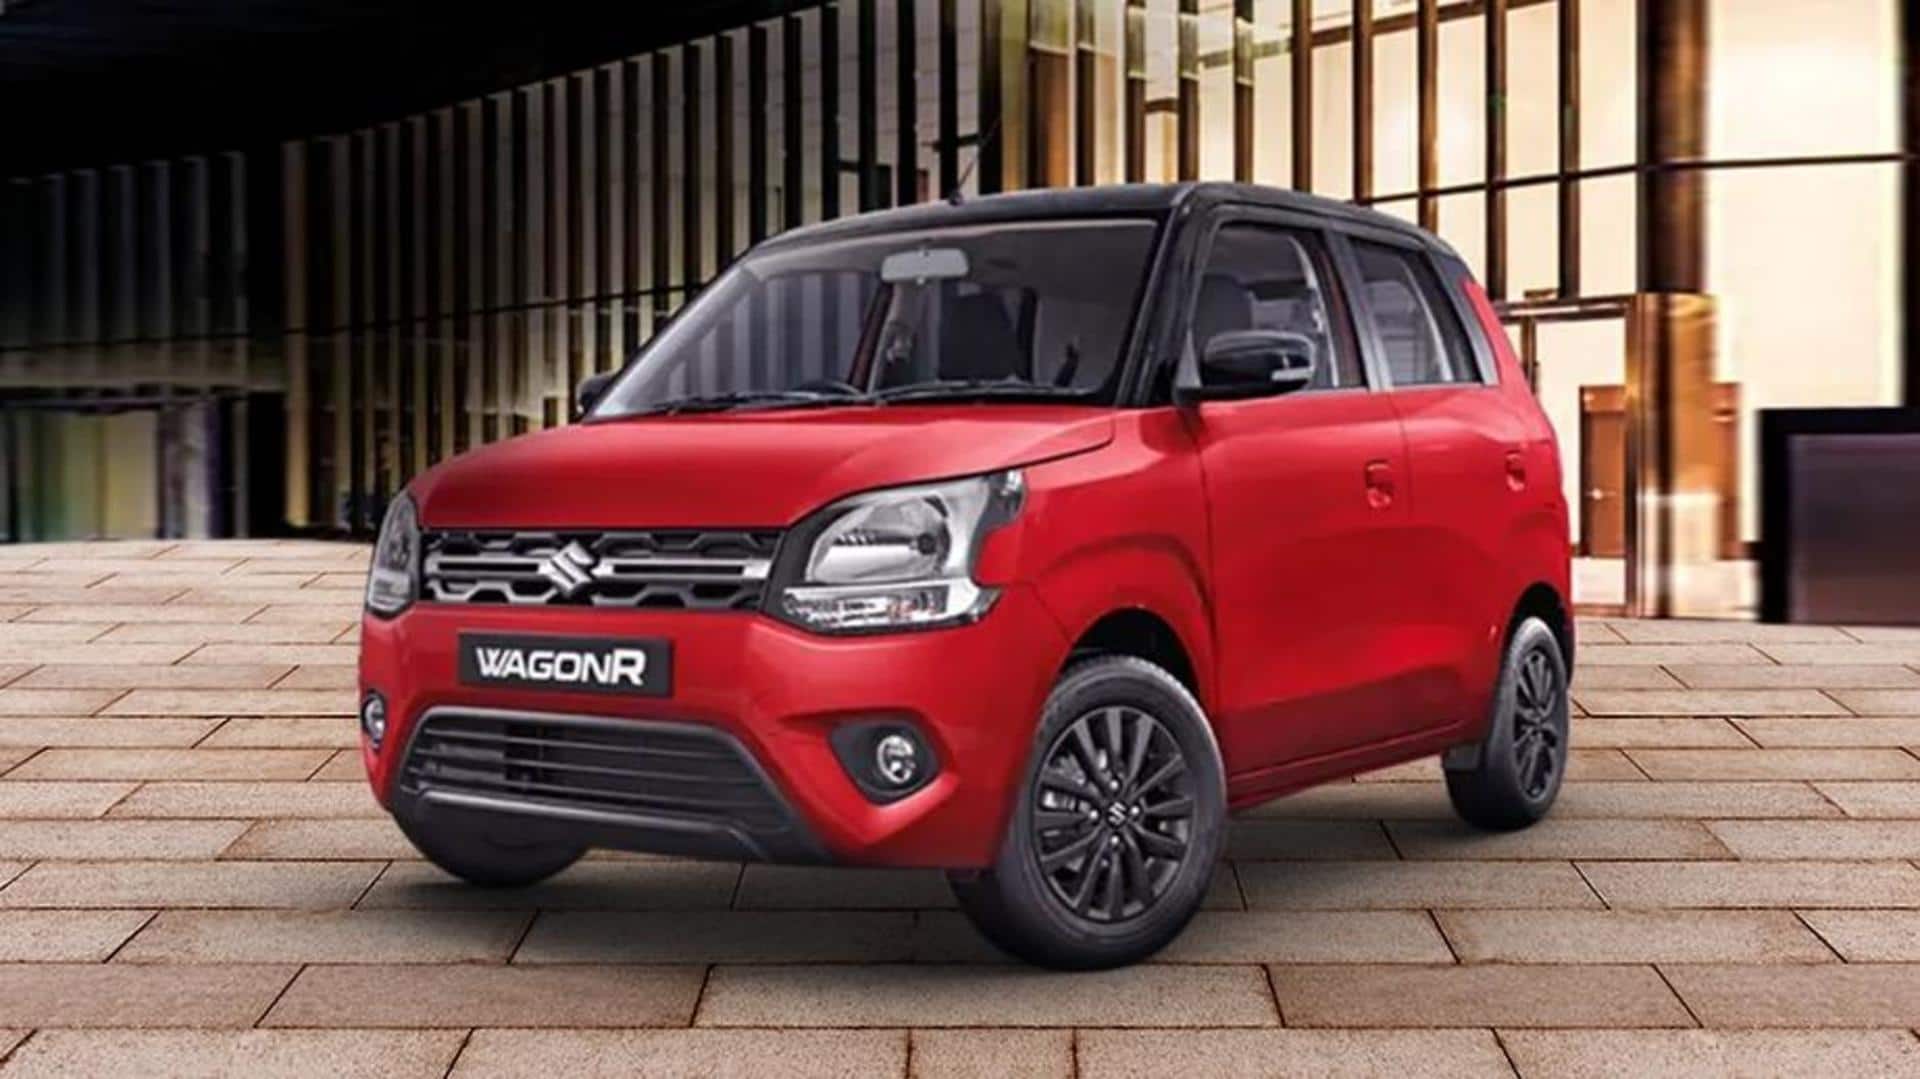 WagonR reaches 30 lakh sales milestone: Tracing hatchback's 24-year-long journey